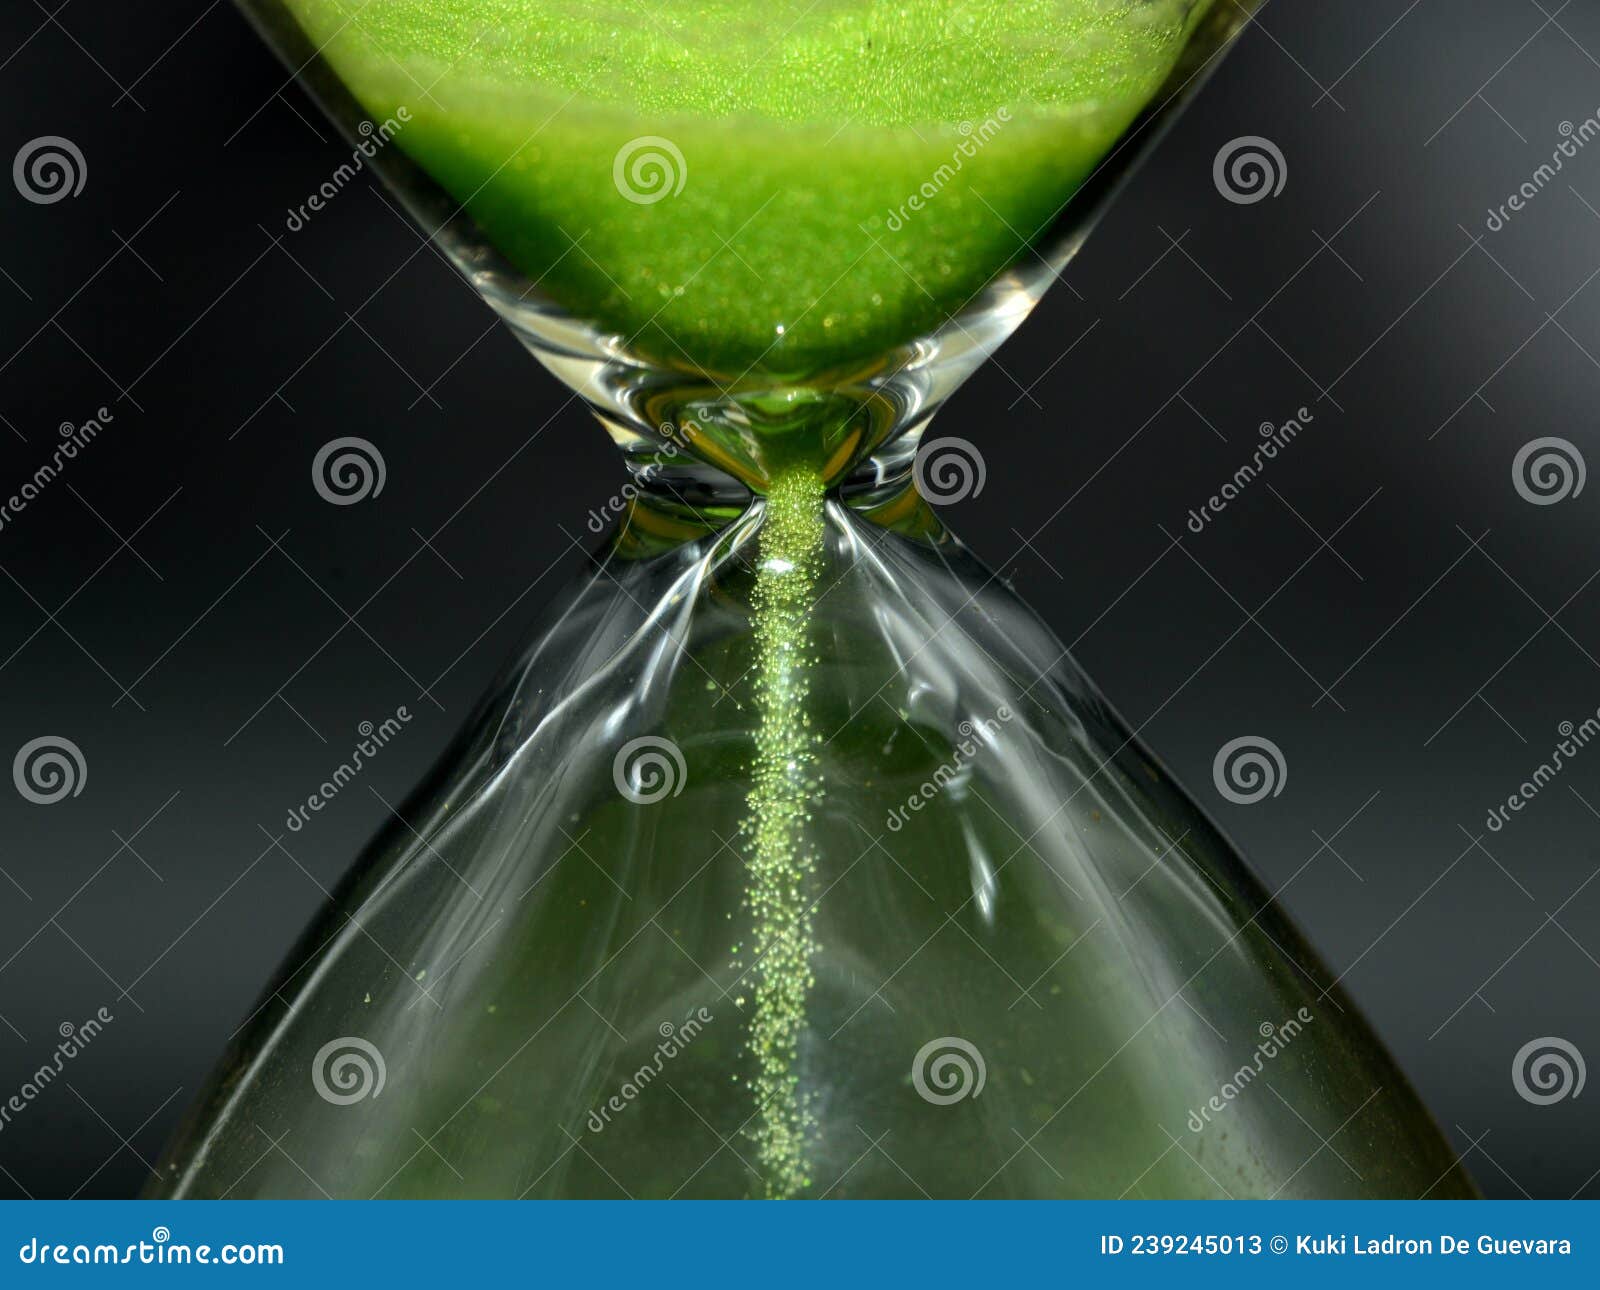 detail of a green hourglass